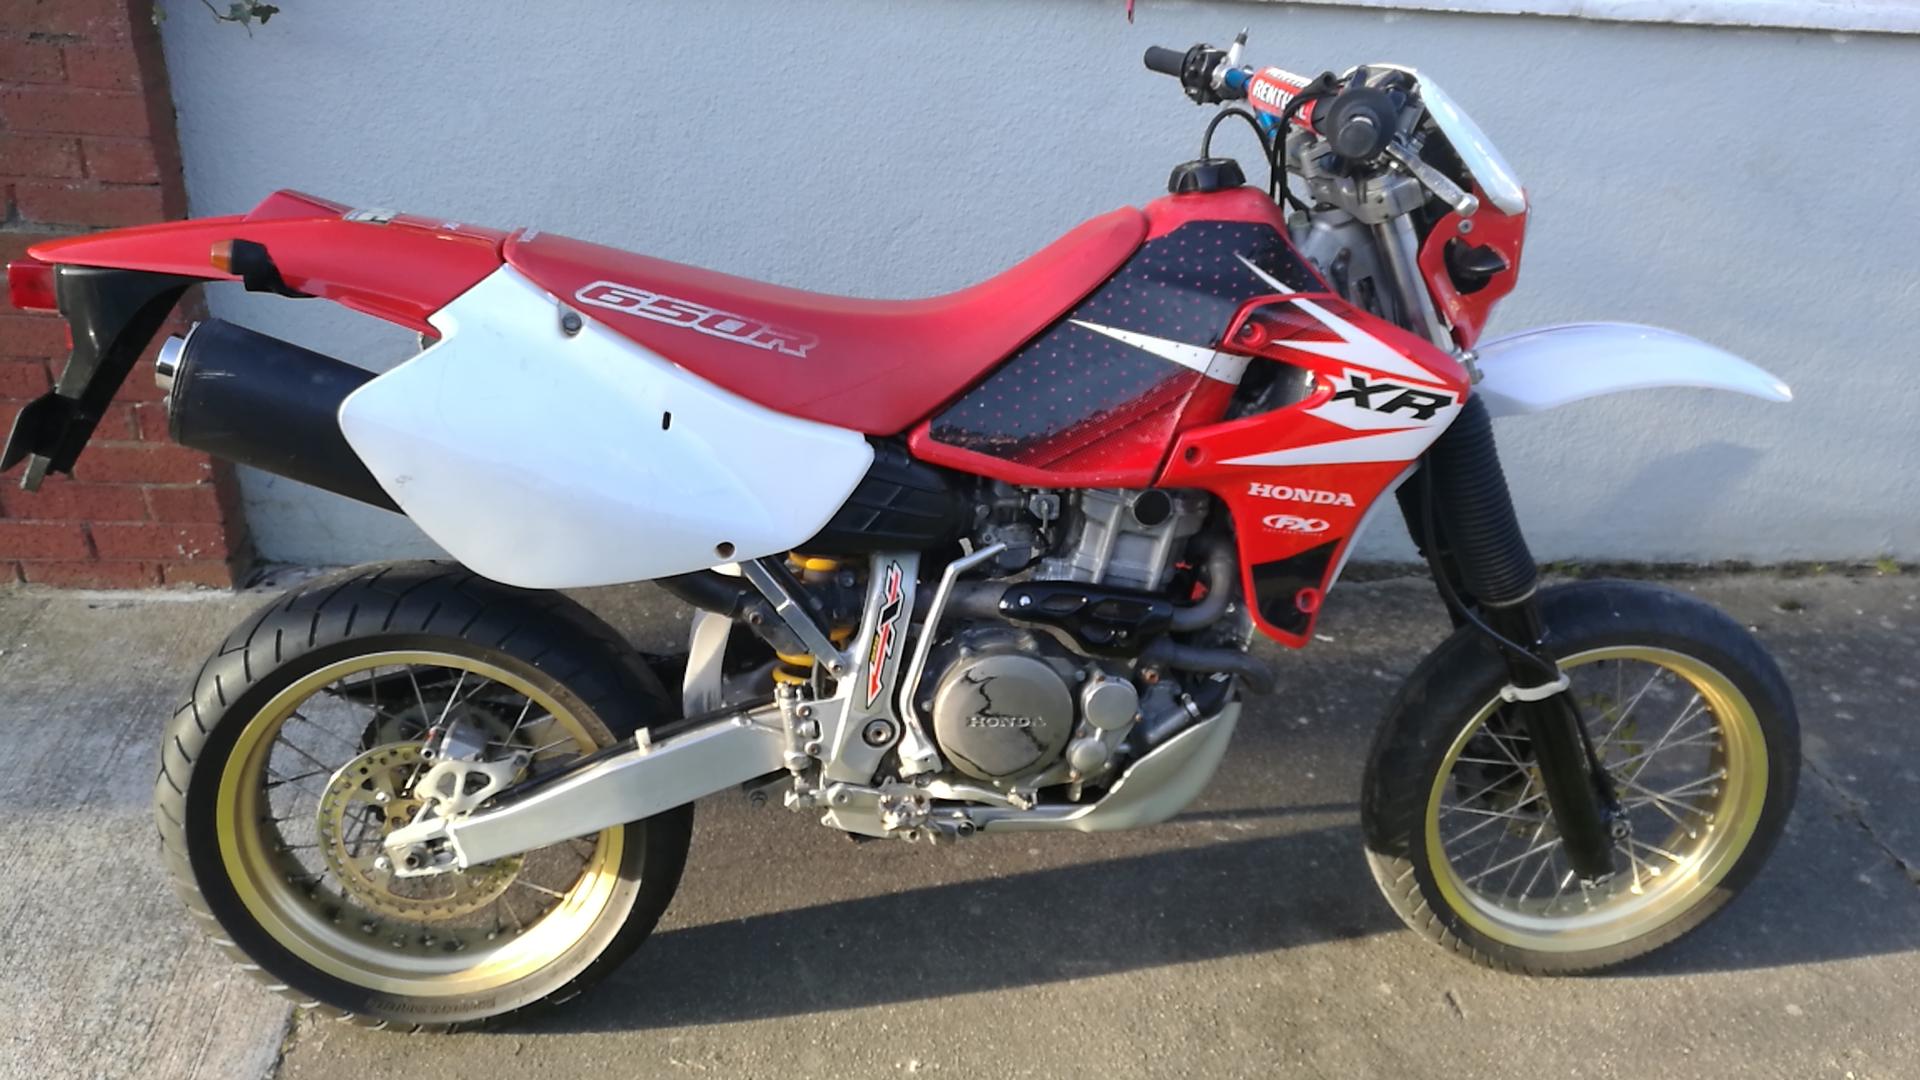 Xr650r Supermoto All Washed Motorcycles